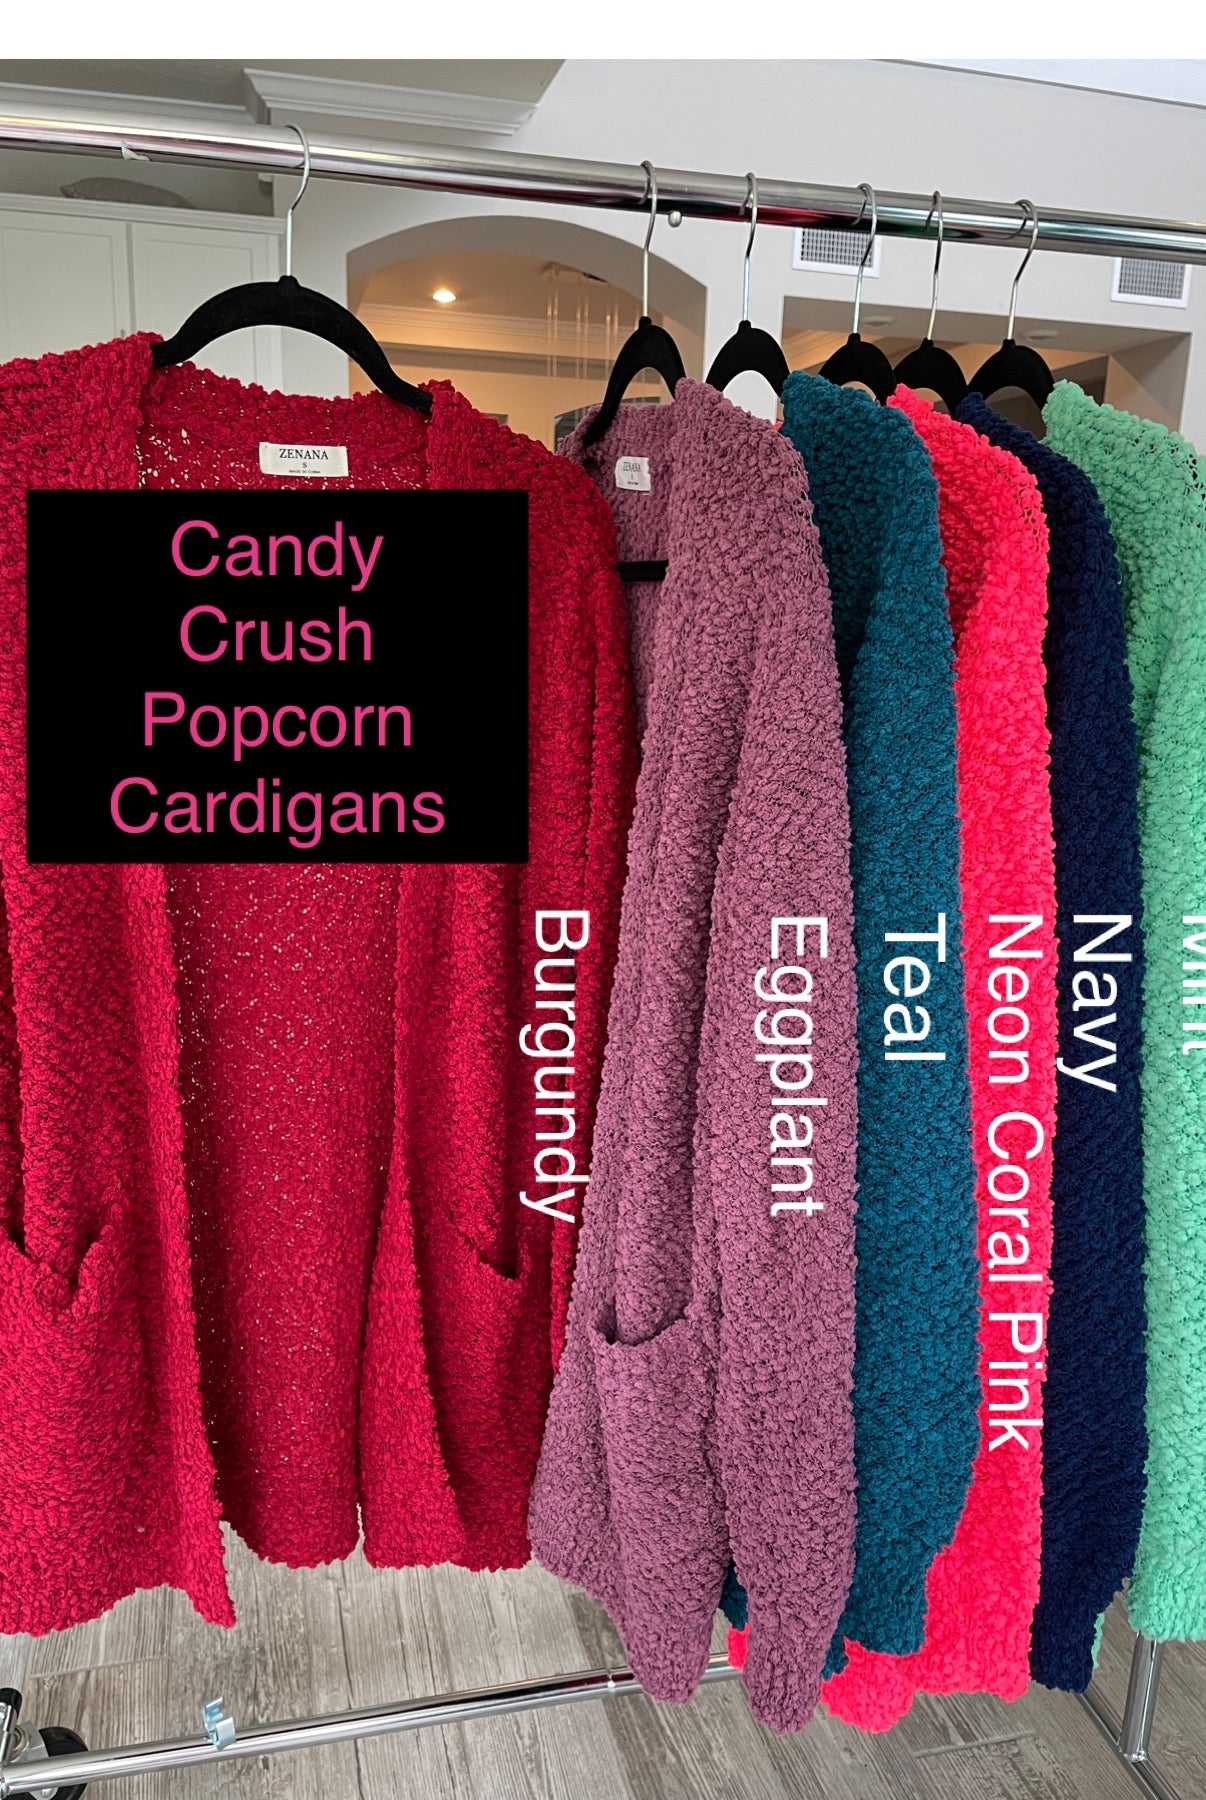 Candy Crush Popcorn Cardigan with Pockets-170 Cardigans- Simply Simpson's Boutique is a Women's Online Fashion Boutique Located in Jupiter, Florida